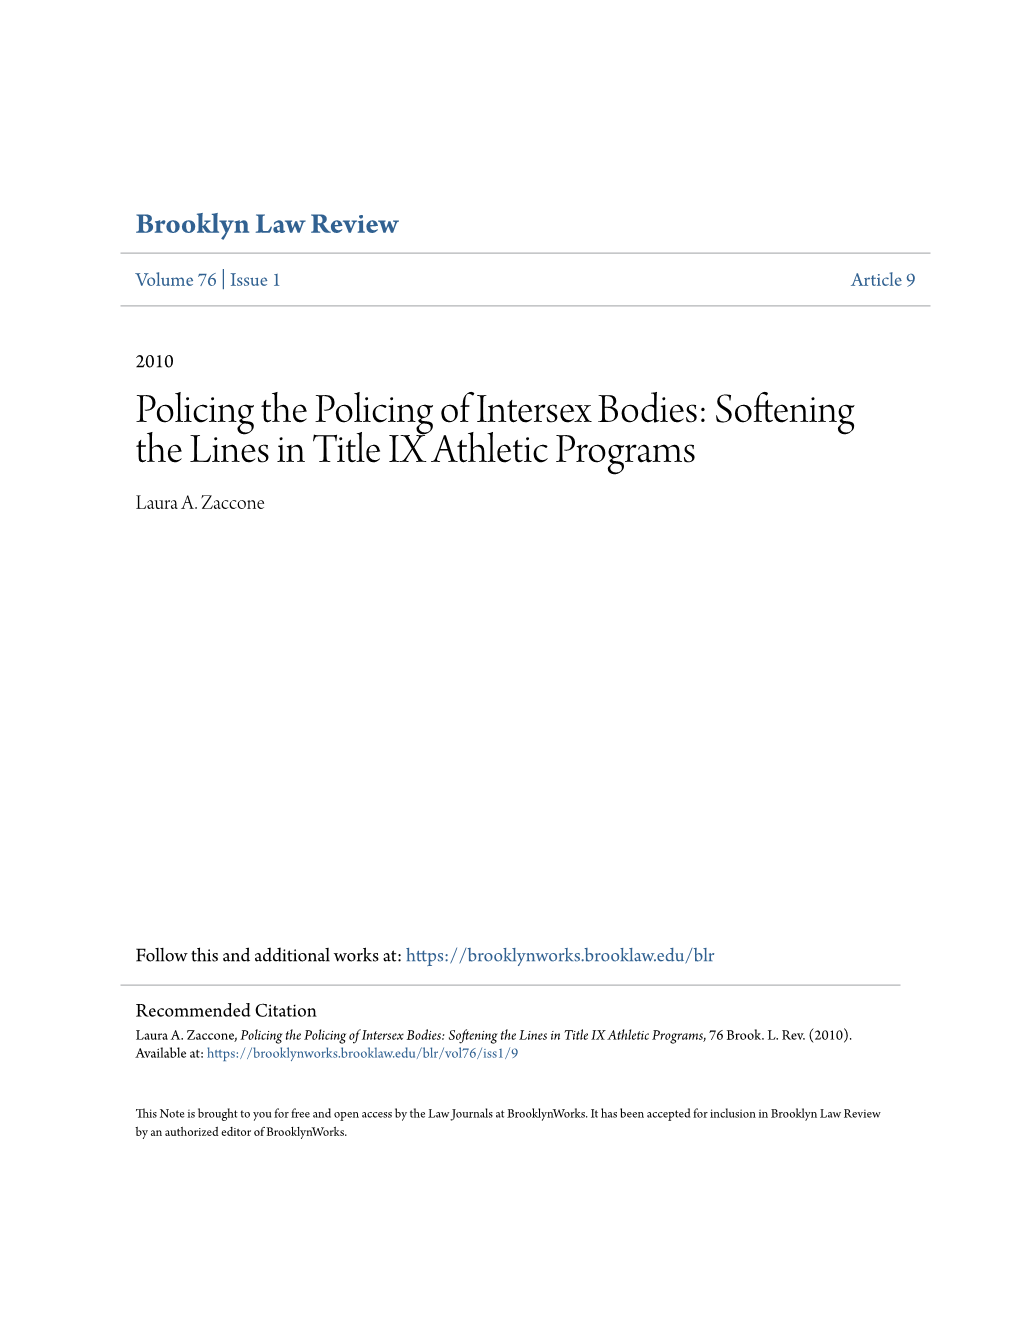 Policing the Policing of Intersex Bodies: Softening the Lines in Title IX Athletic Programs Laura A